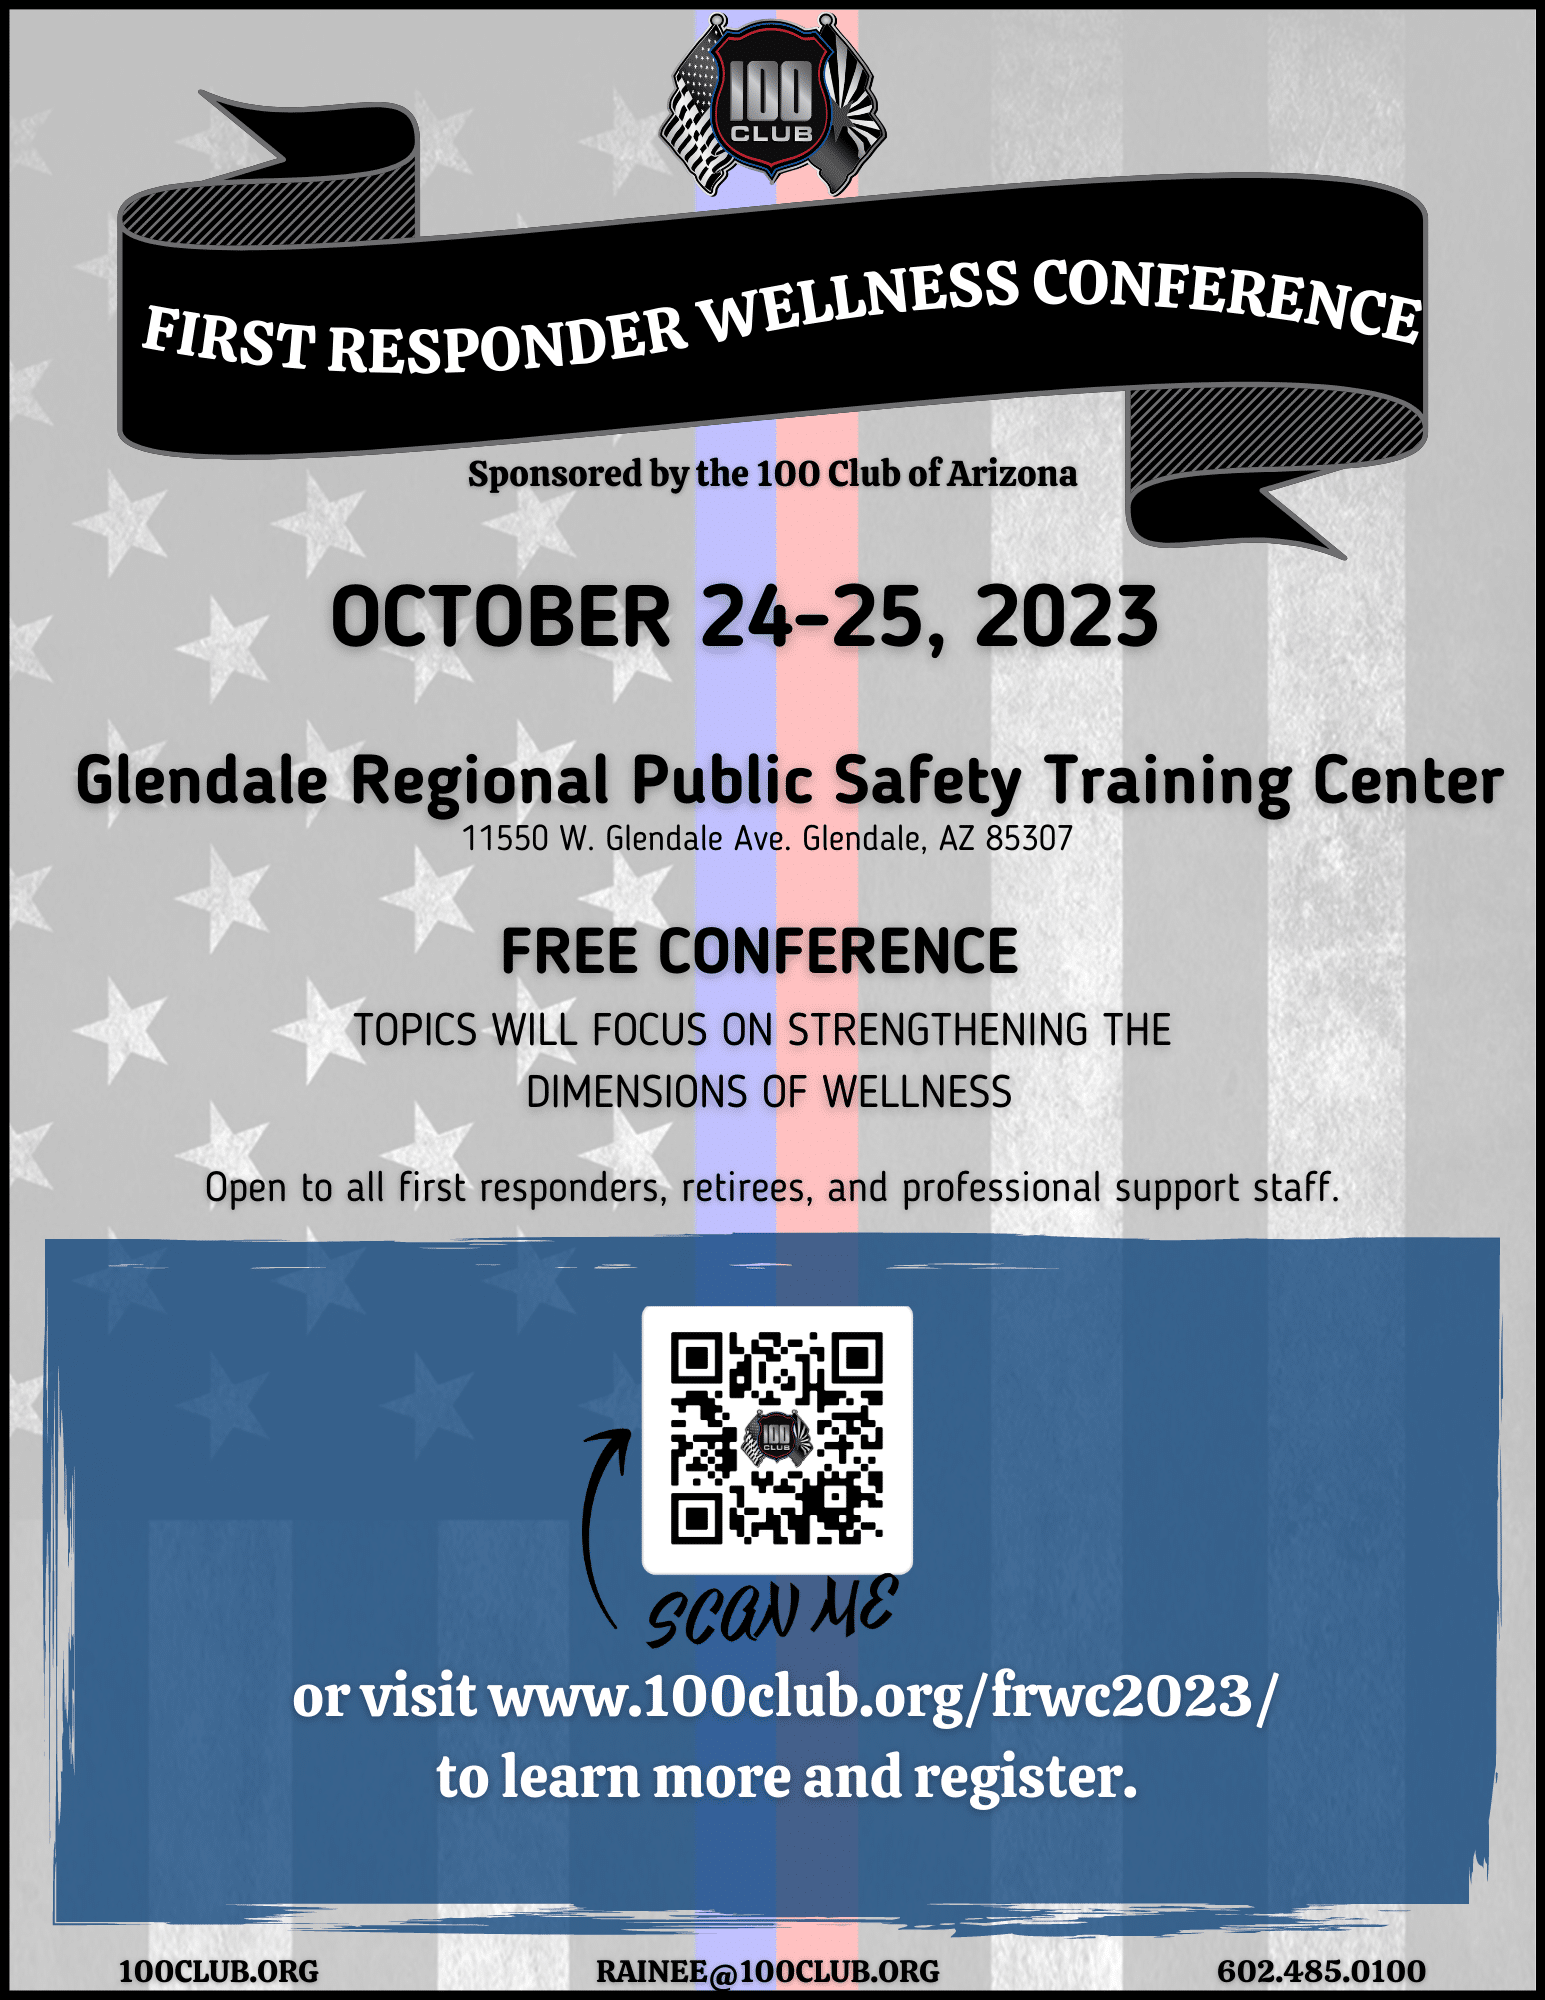 First Responder Wellness Conference 2023